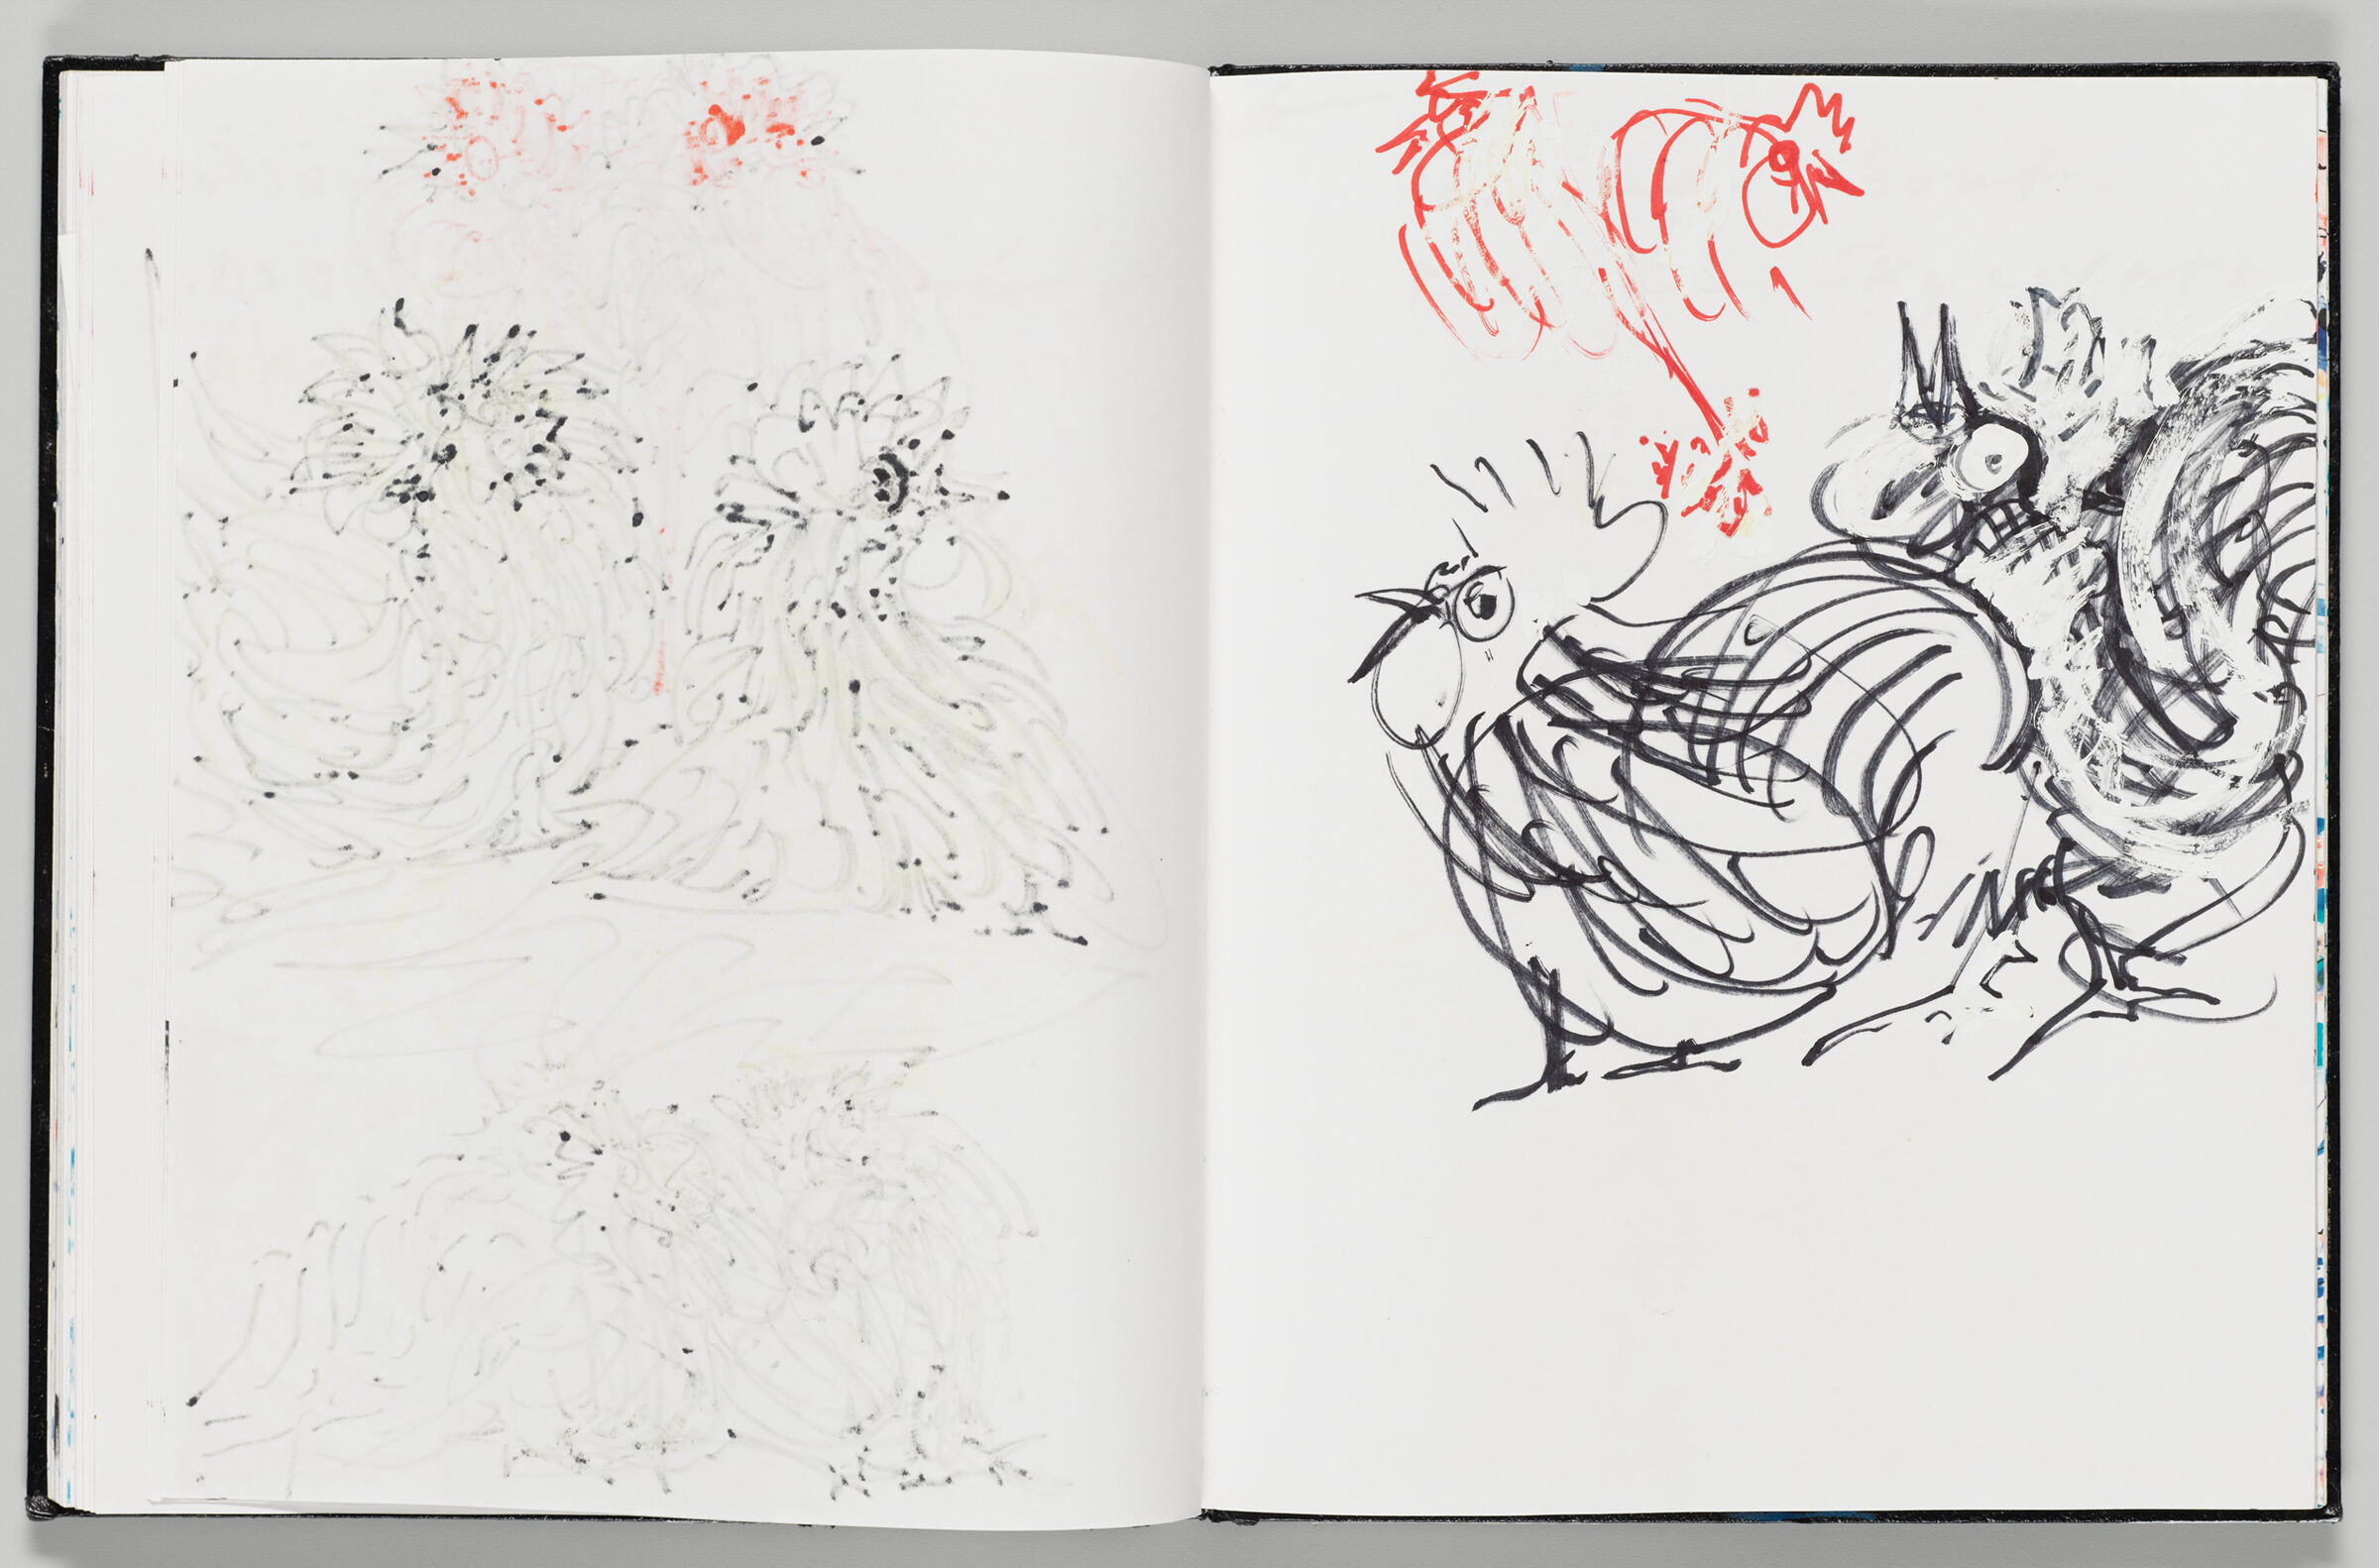 Untitled (Bleed-Through From Previous Page, Left Page); Untitled (Roosters, Right Page)